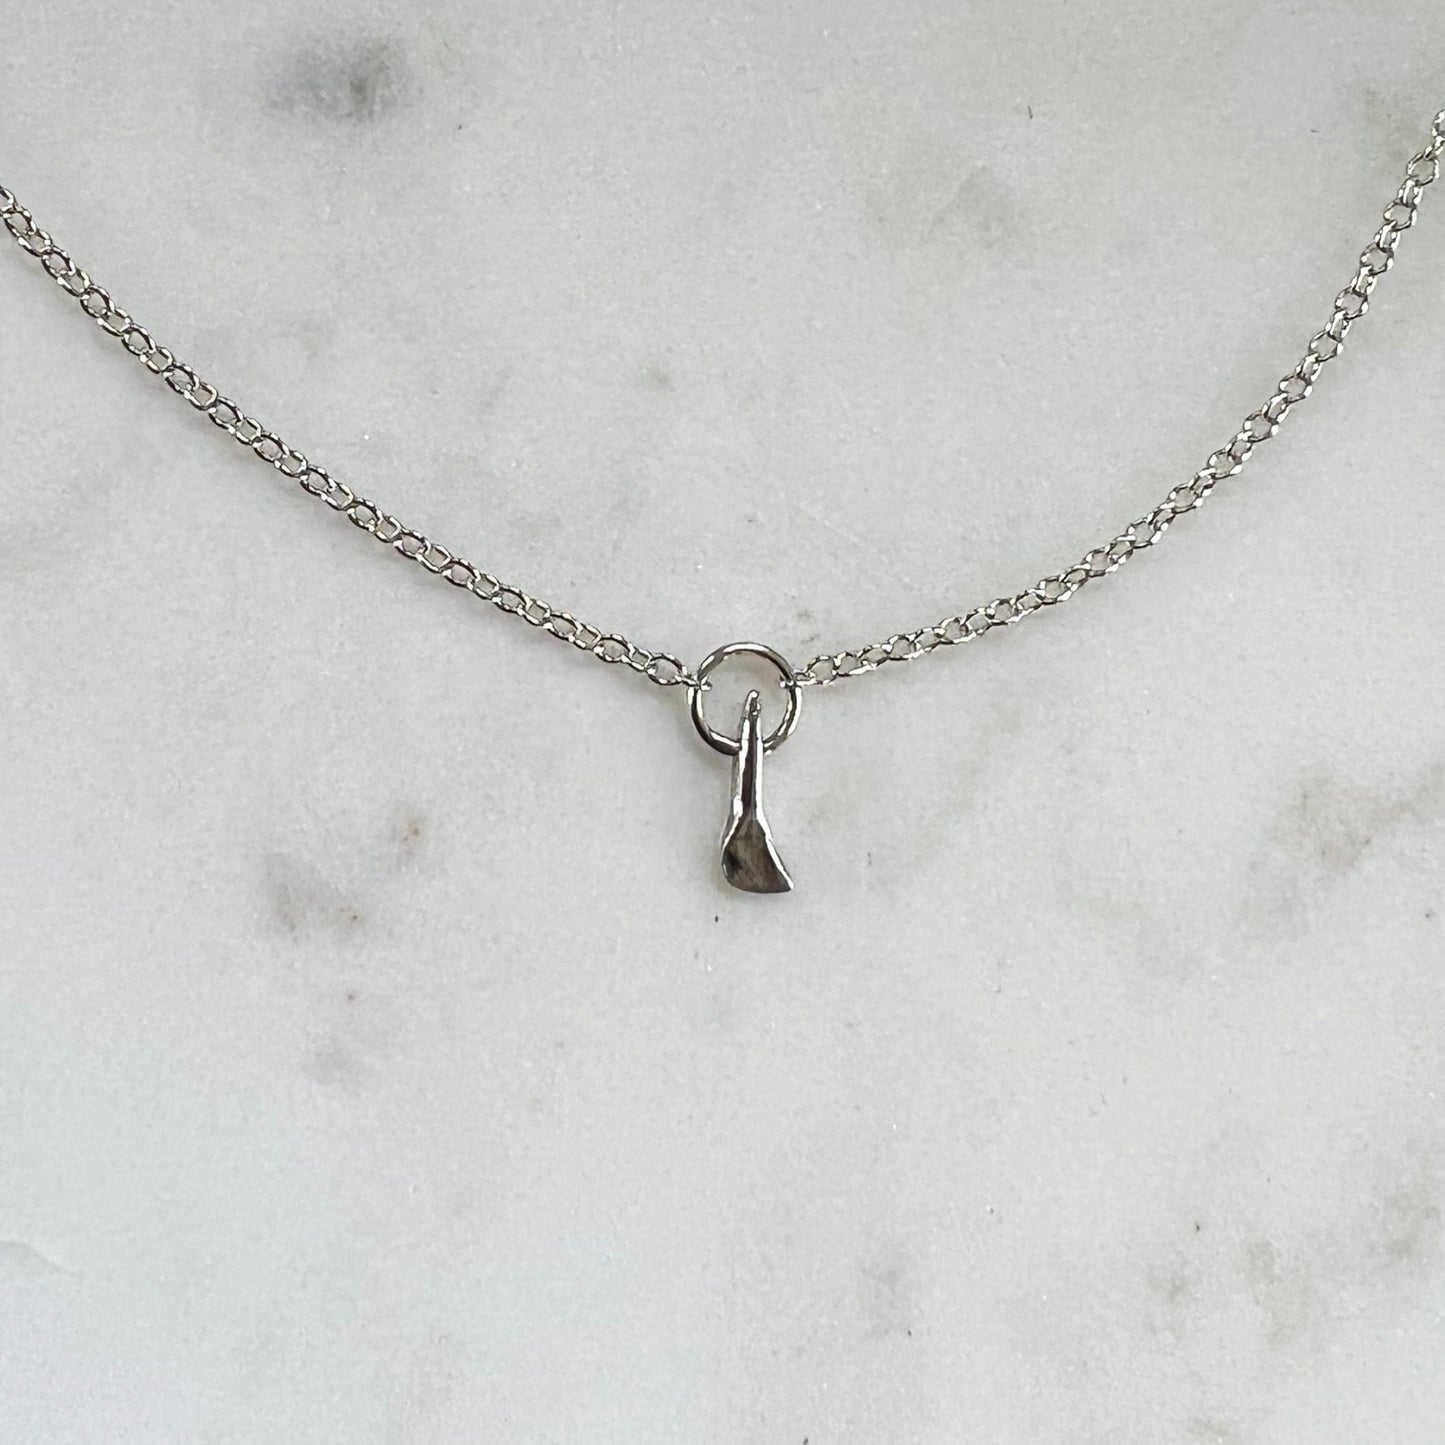 Fawn tooth charm necklace